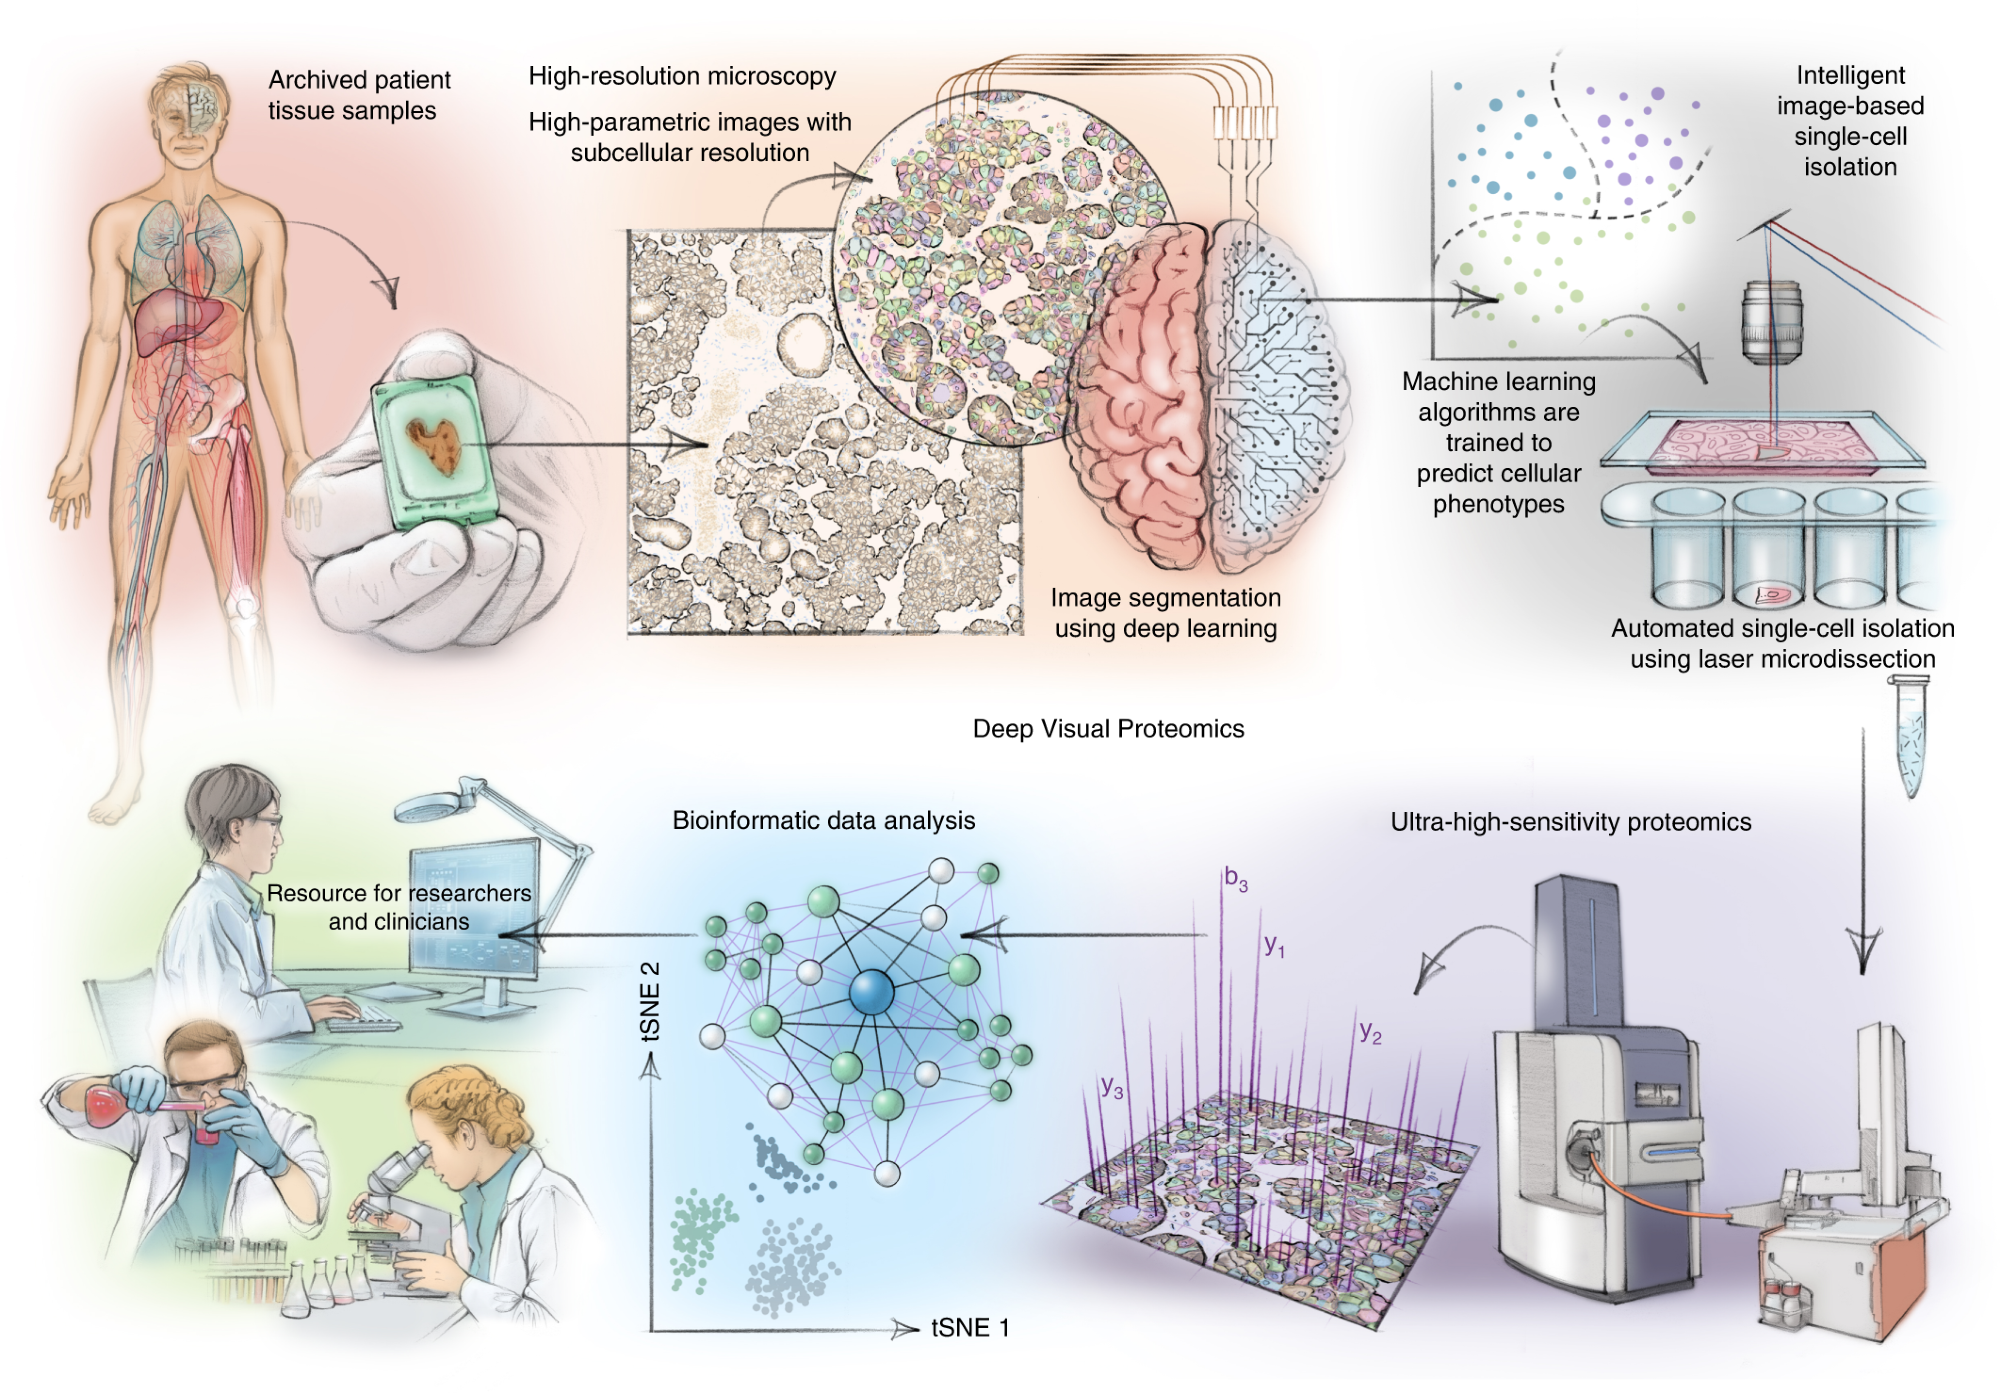 DVP combines high-resolution imaging, AI-guided image analysis for single-cell classification and isolation with an ultra-sensitive proteomics workflow. DVP links data-rich imaging of cell culture or archived patient biobank tissues with deep-learning-based cell segmentation and machine-learning-based identification of cell types and states. (Un)supervised AI-classified cellular or subcellular objects of interest undergo automated LMD and MS-based proteomic profiling. Subsequent bioinformatics data analysis enables data mining to discover protein signatures, providing molecular insights into proteome variation in health and disease states at the level of single cells. tSNE, t-distributed stochastic neighbor embedding.